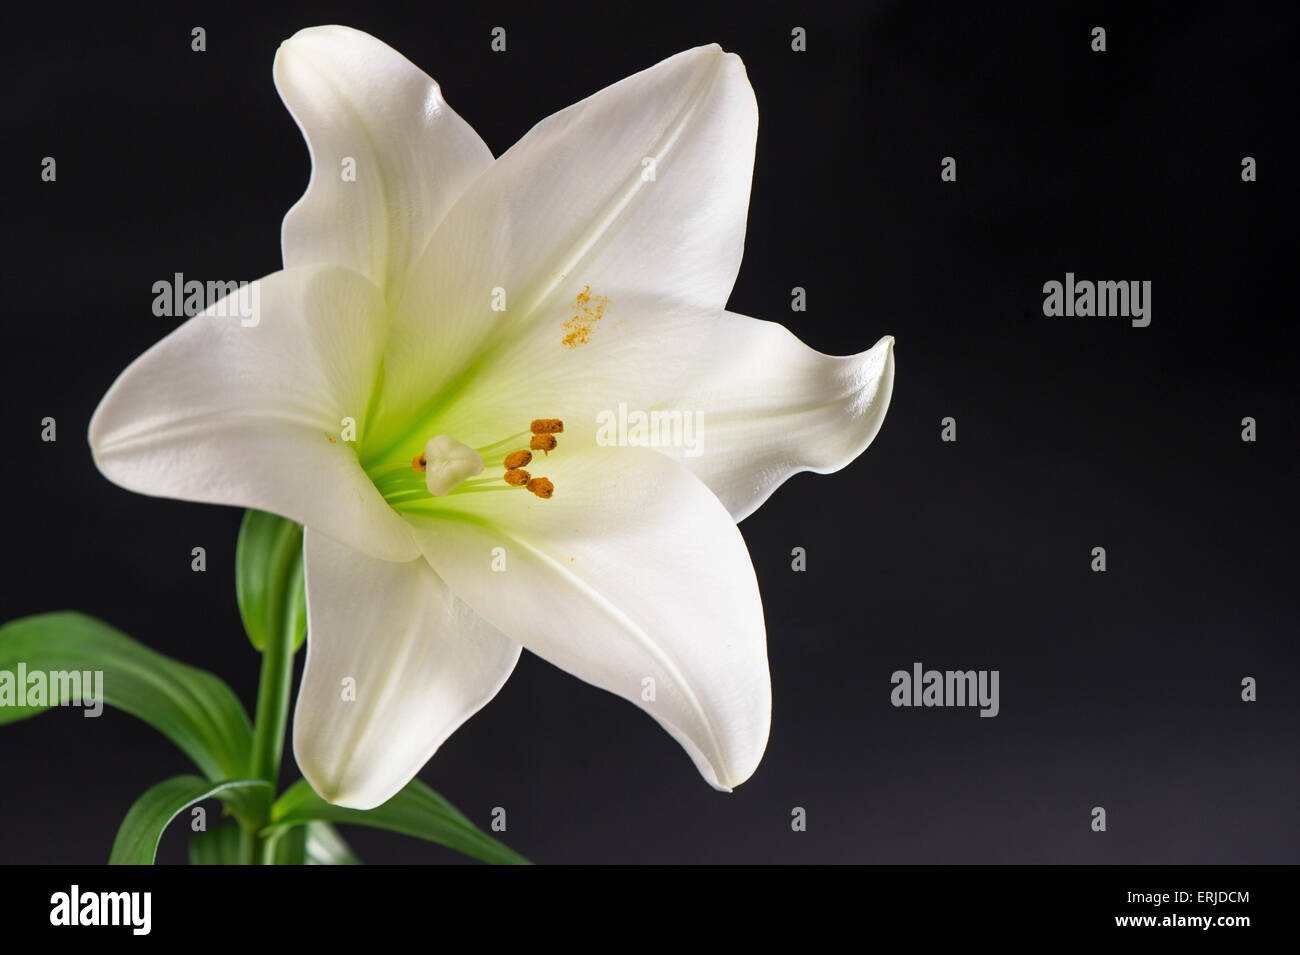 White lily flower blossom over black background. Condolence card concept Stock Photo